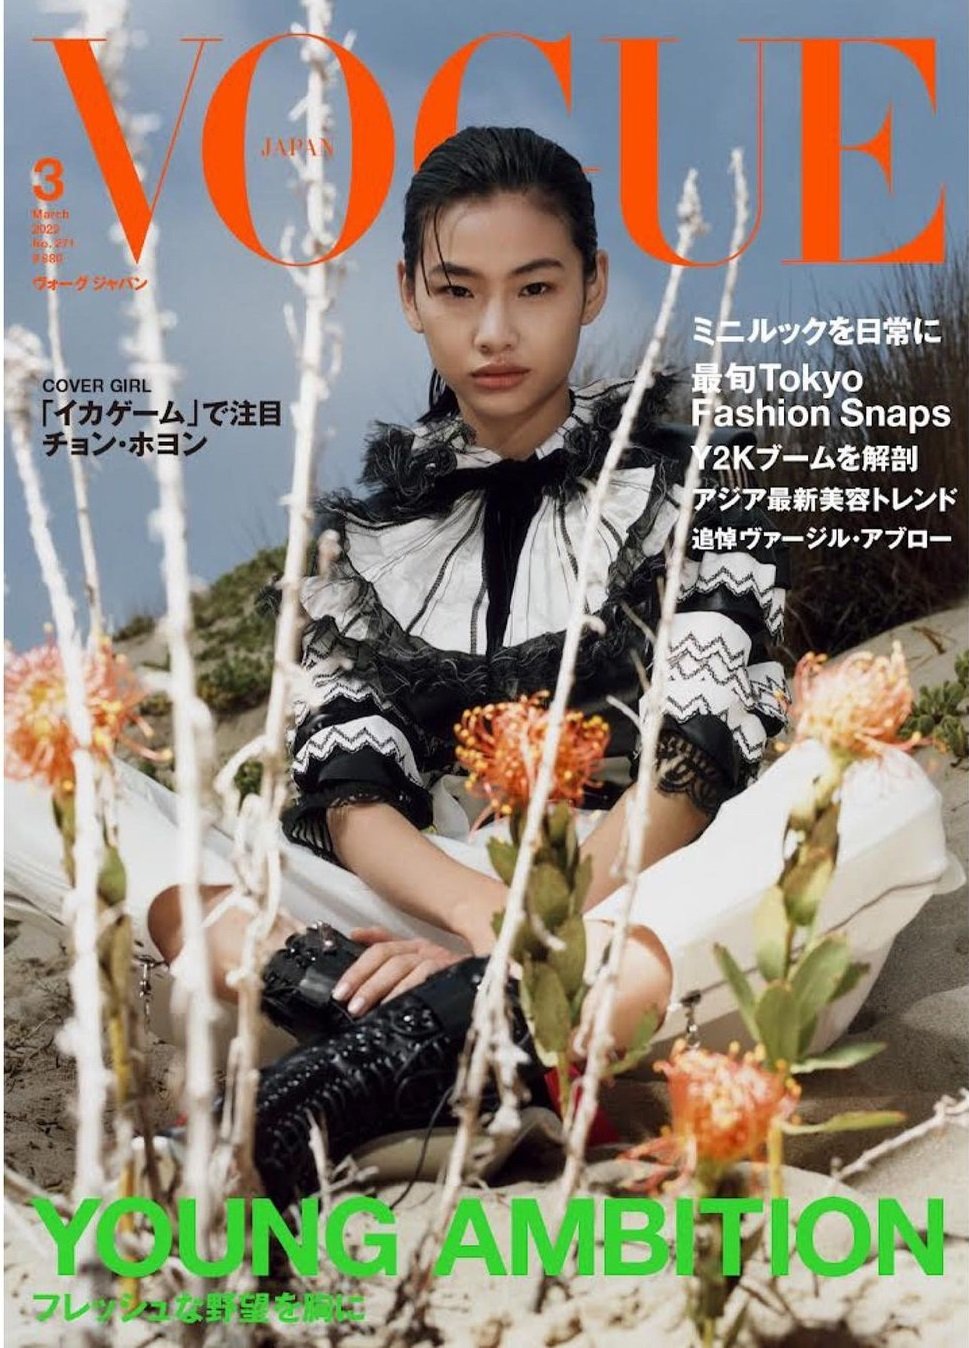 From Squid Game to Supernova: Hoyeon Jung is Vogue's February Cover Star